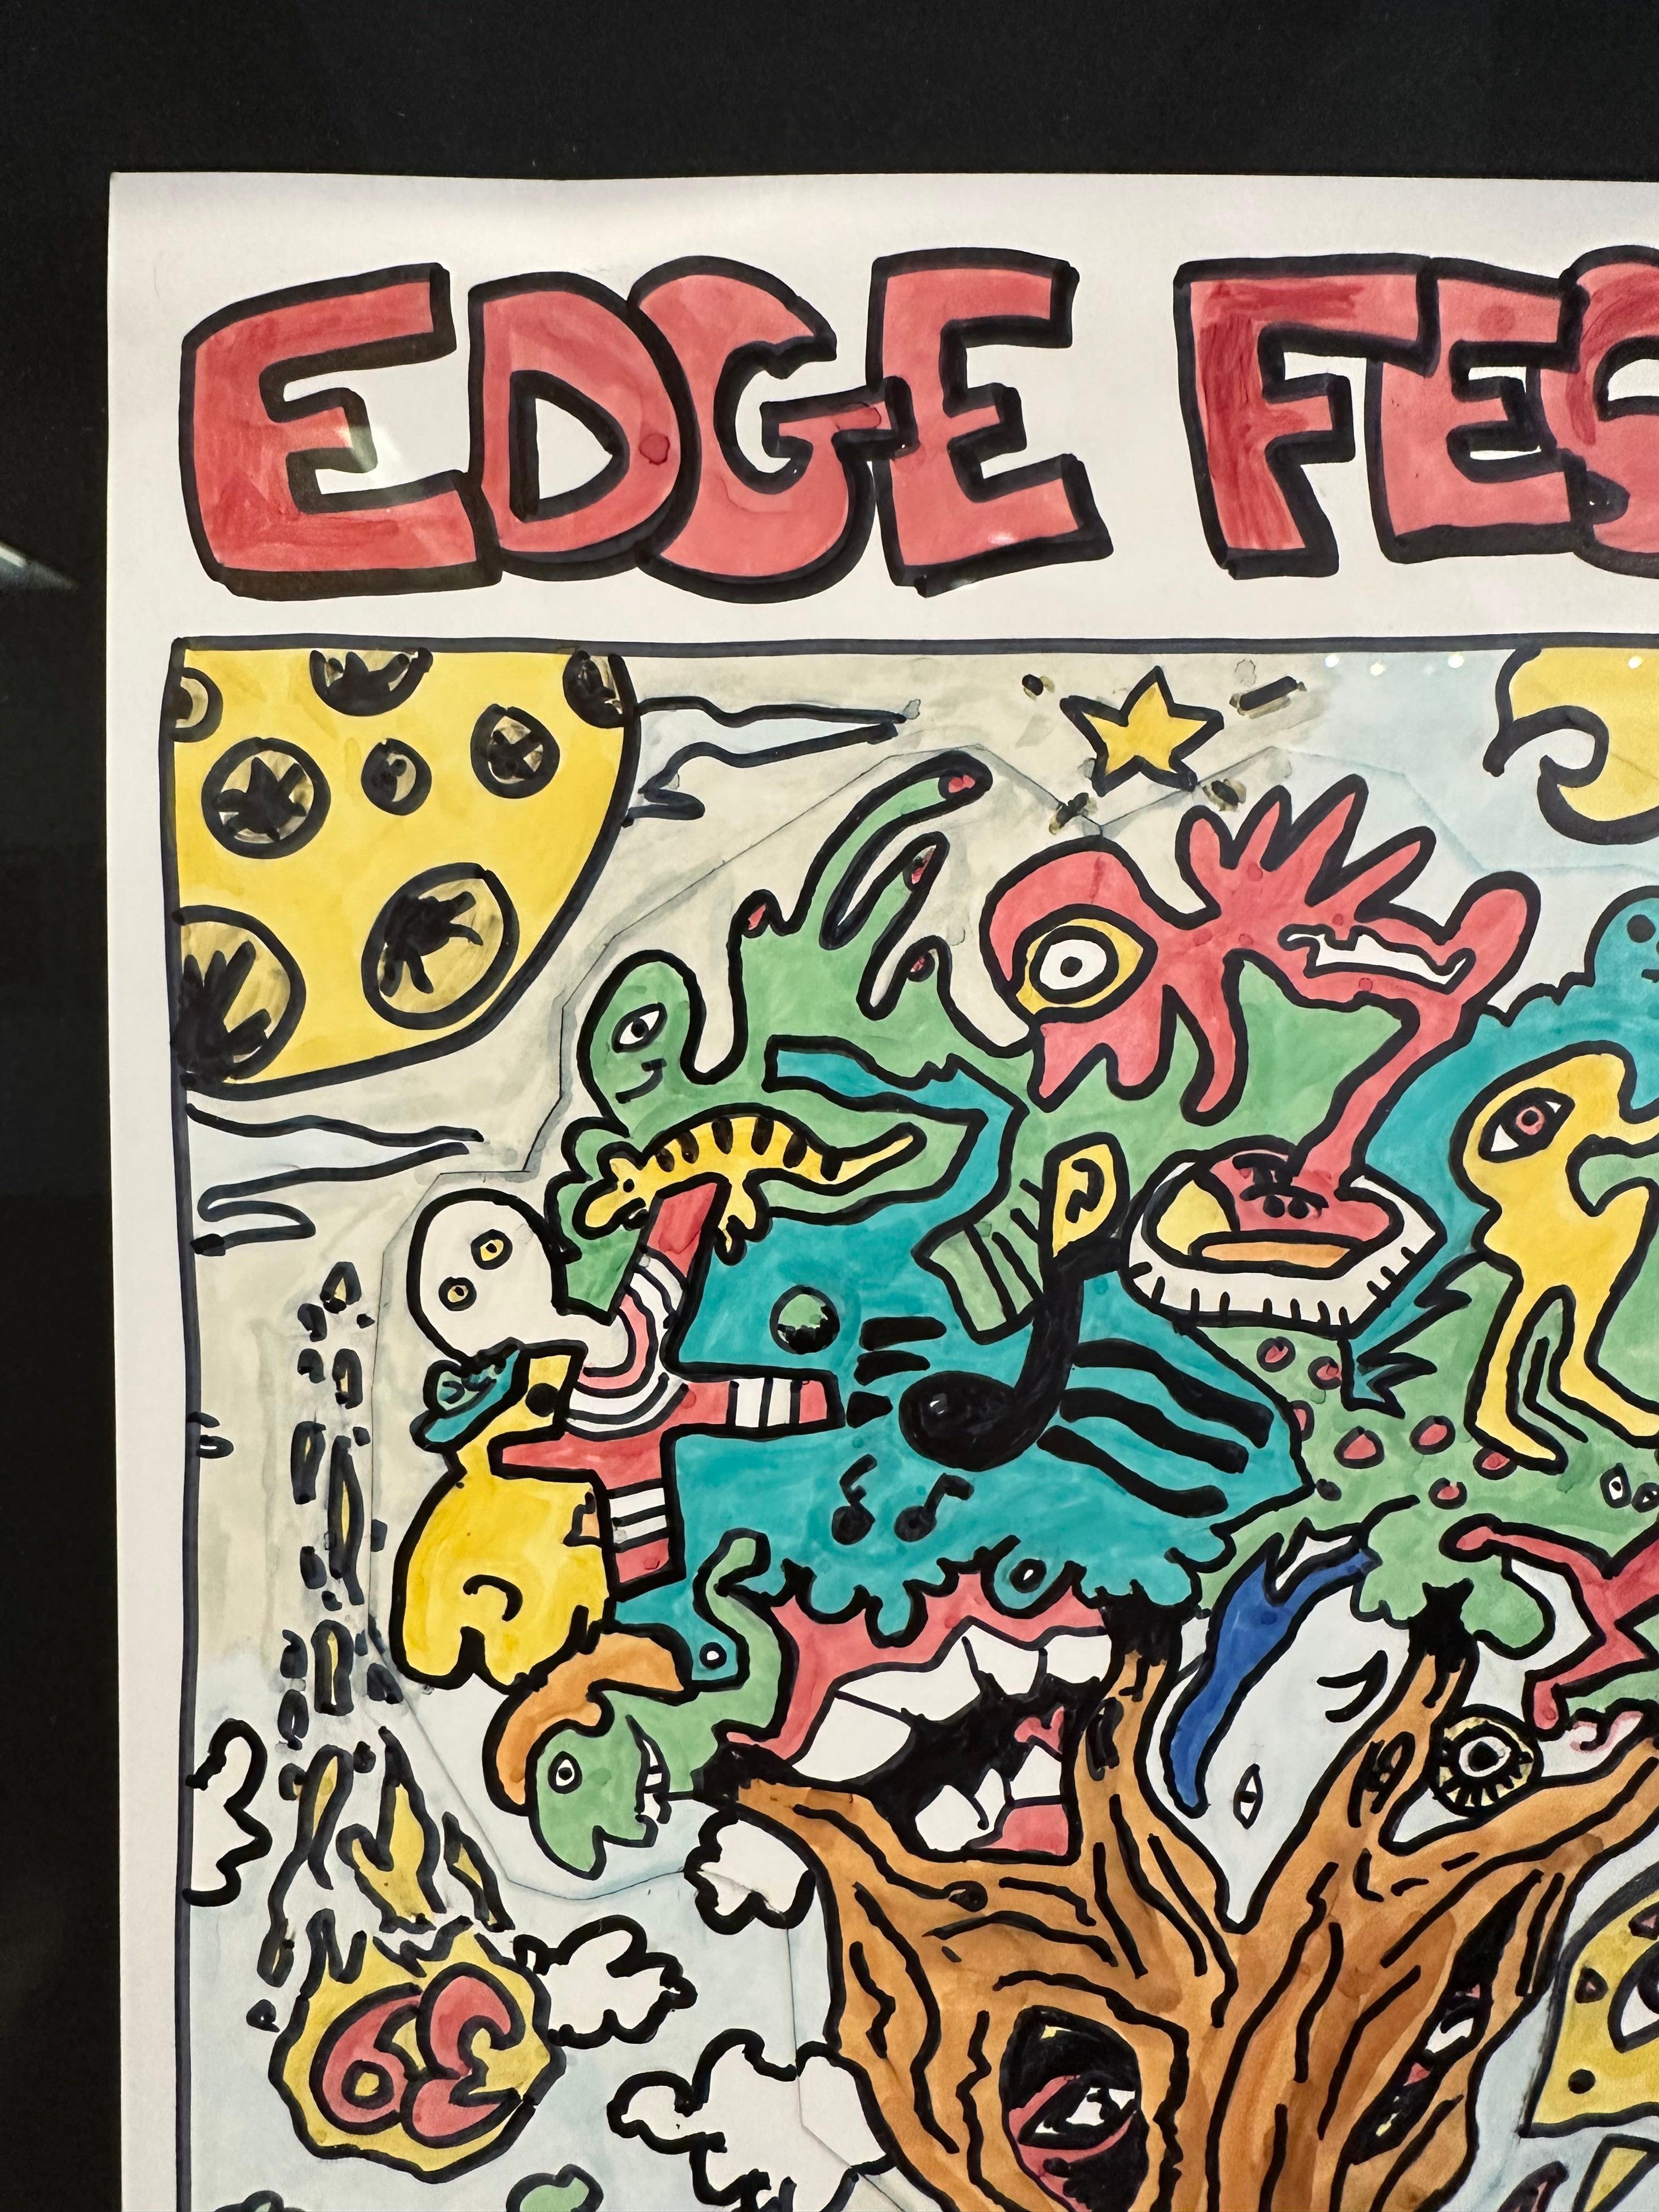 Edgefest Concept #2 - Painting by Brad Fuller